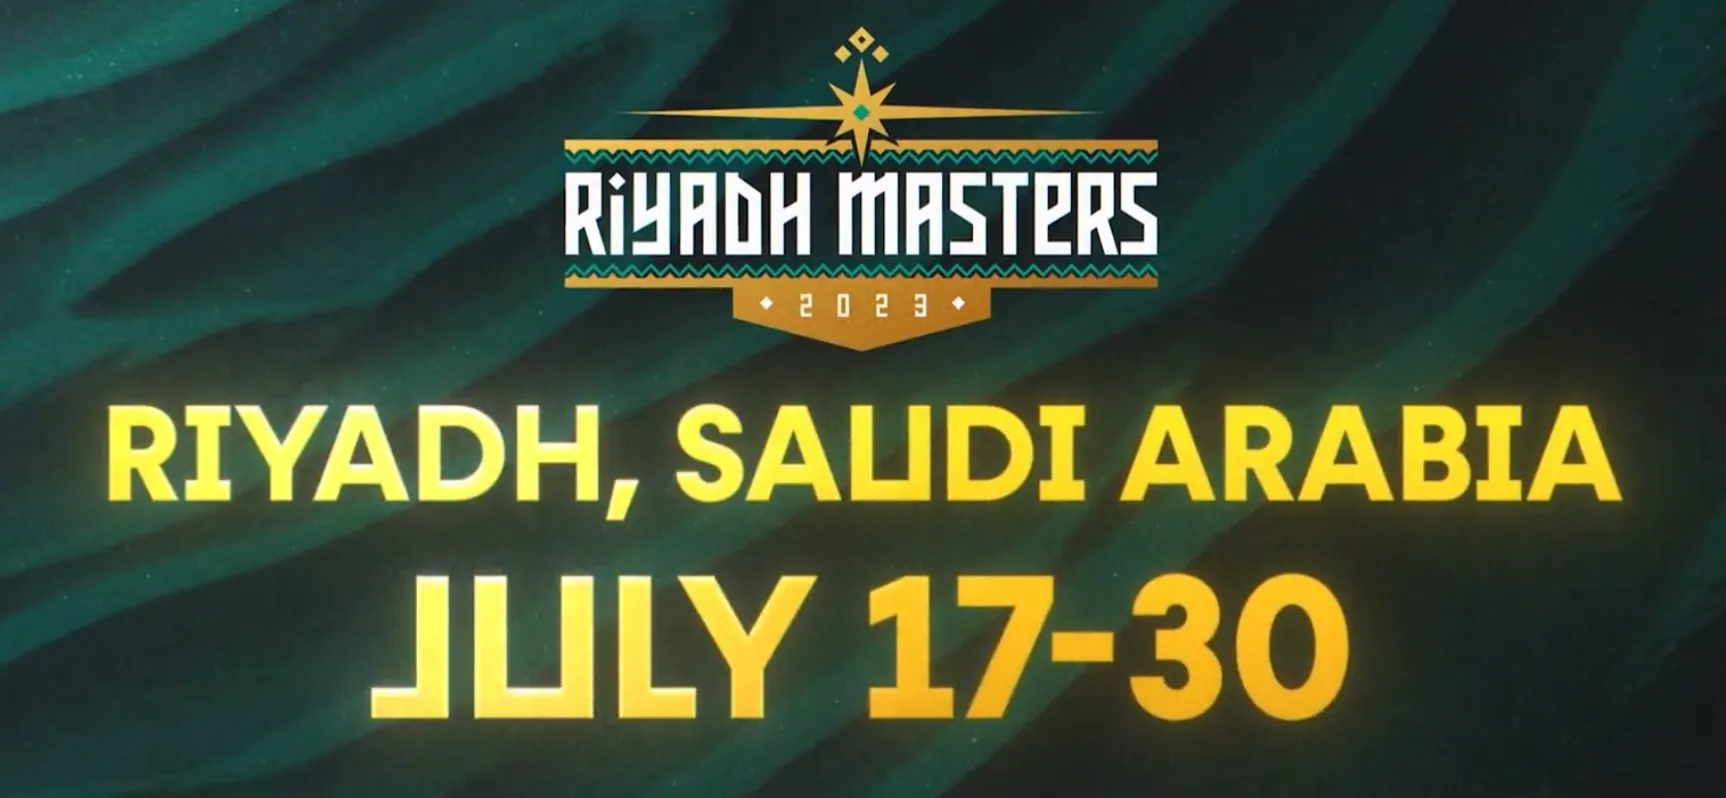 Dota 2 Riyadh Masters All teams, prize pool, and how to watch Dot